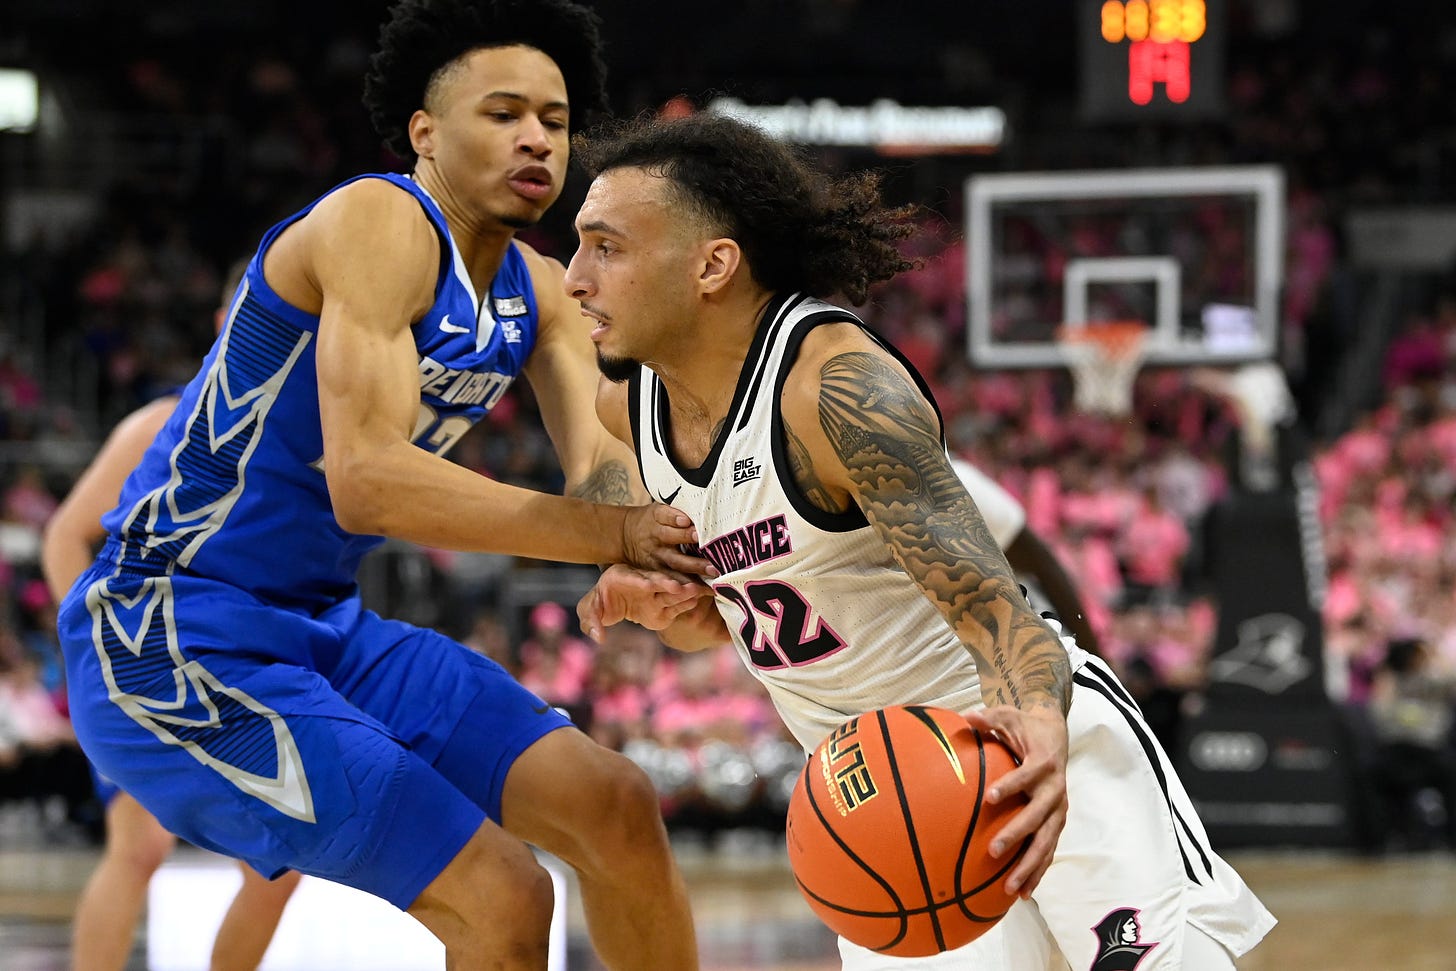 Providence Friars guard Devin Carter is the Big East Player of the Year